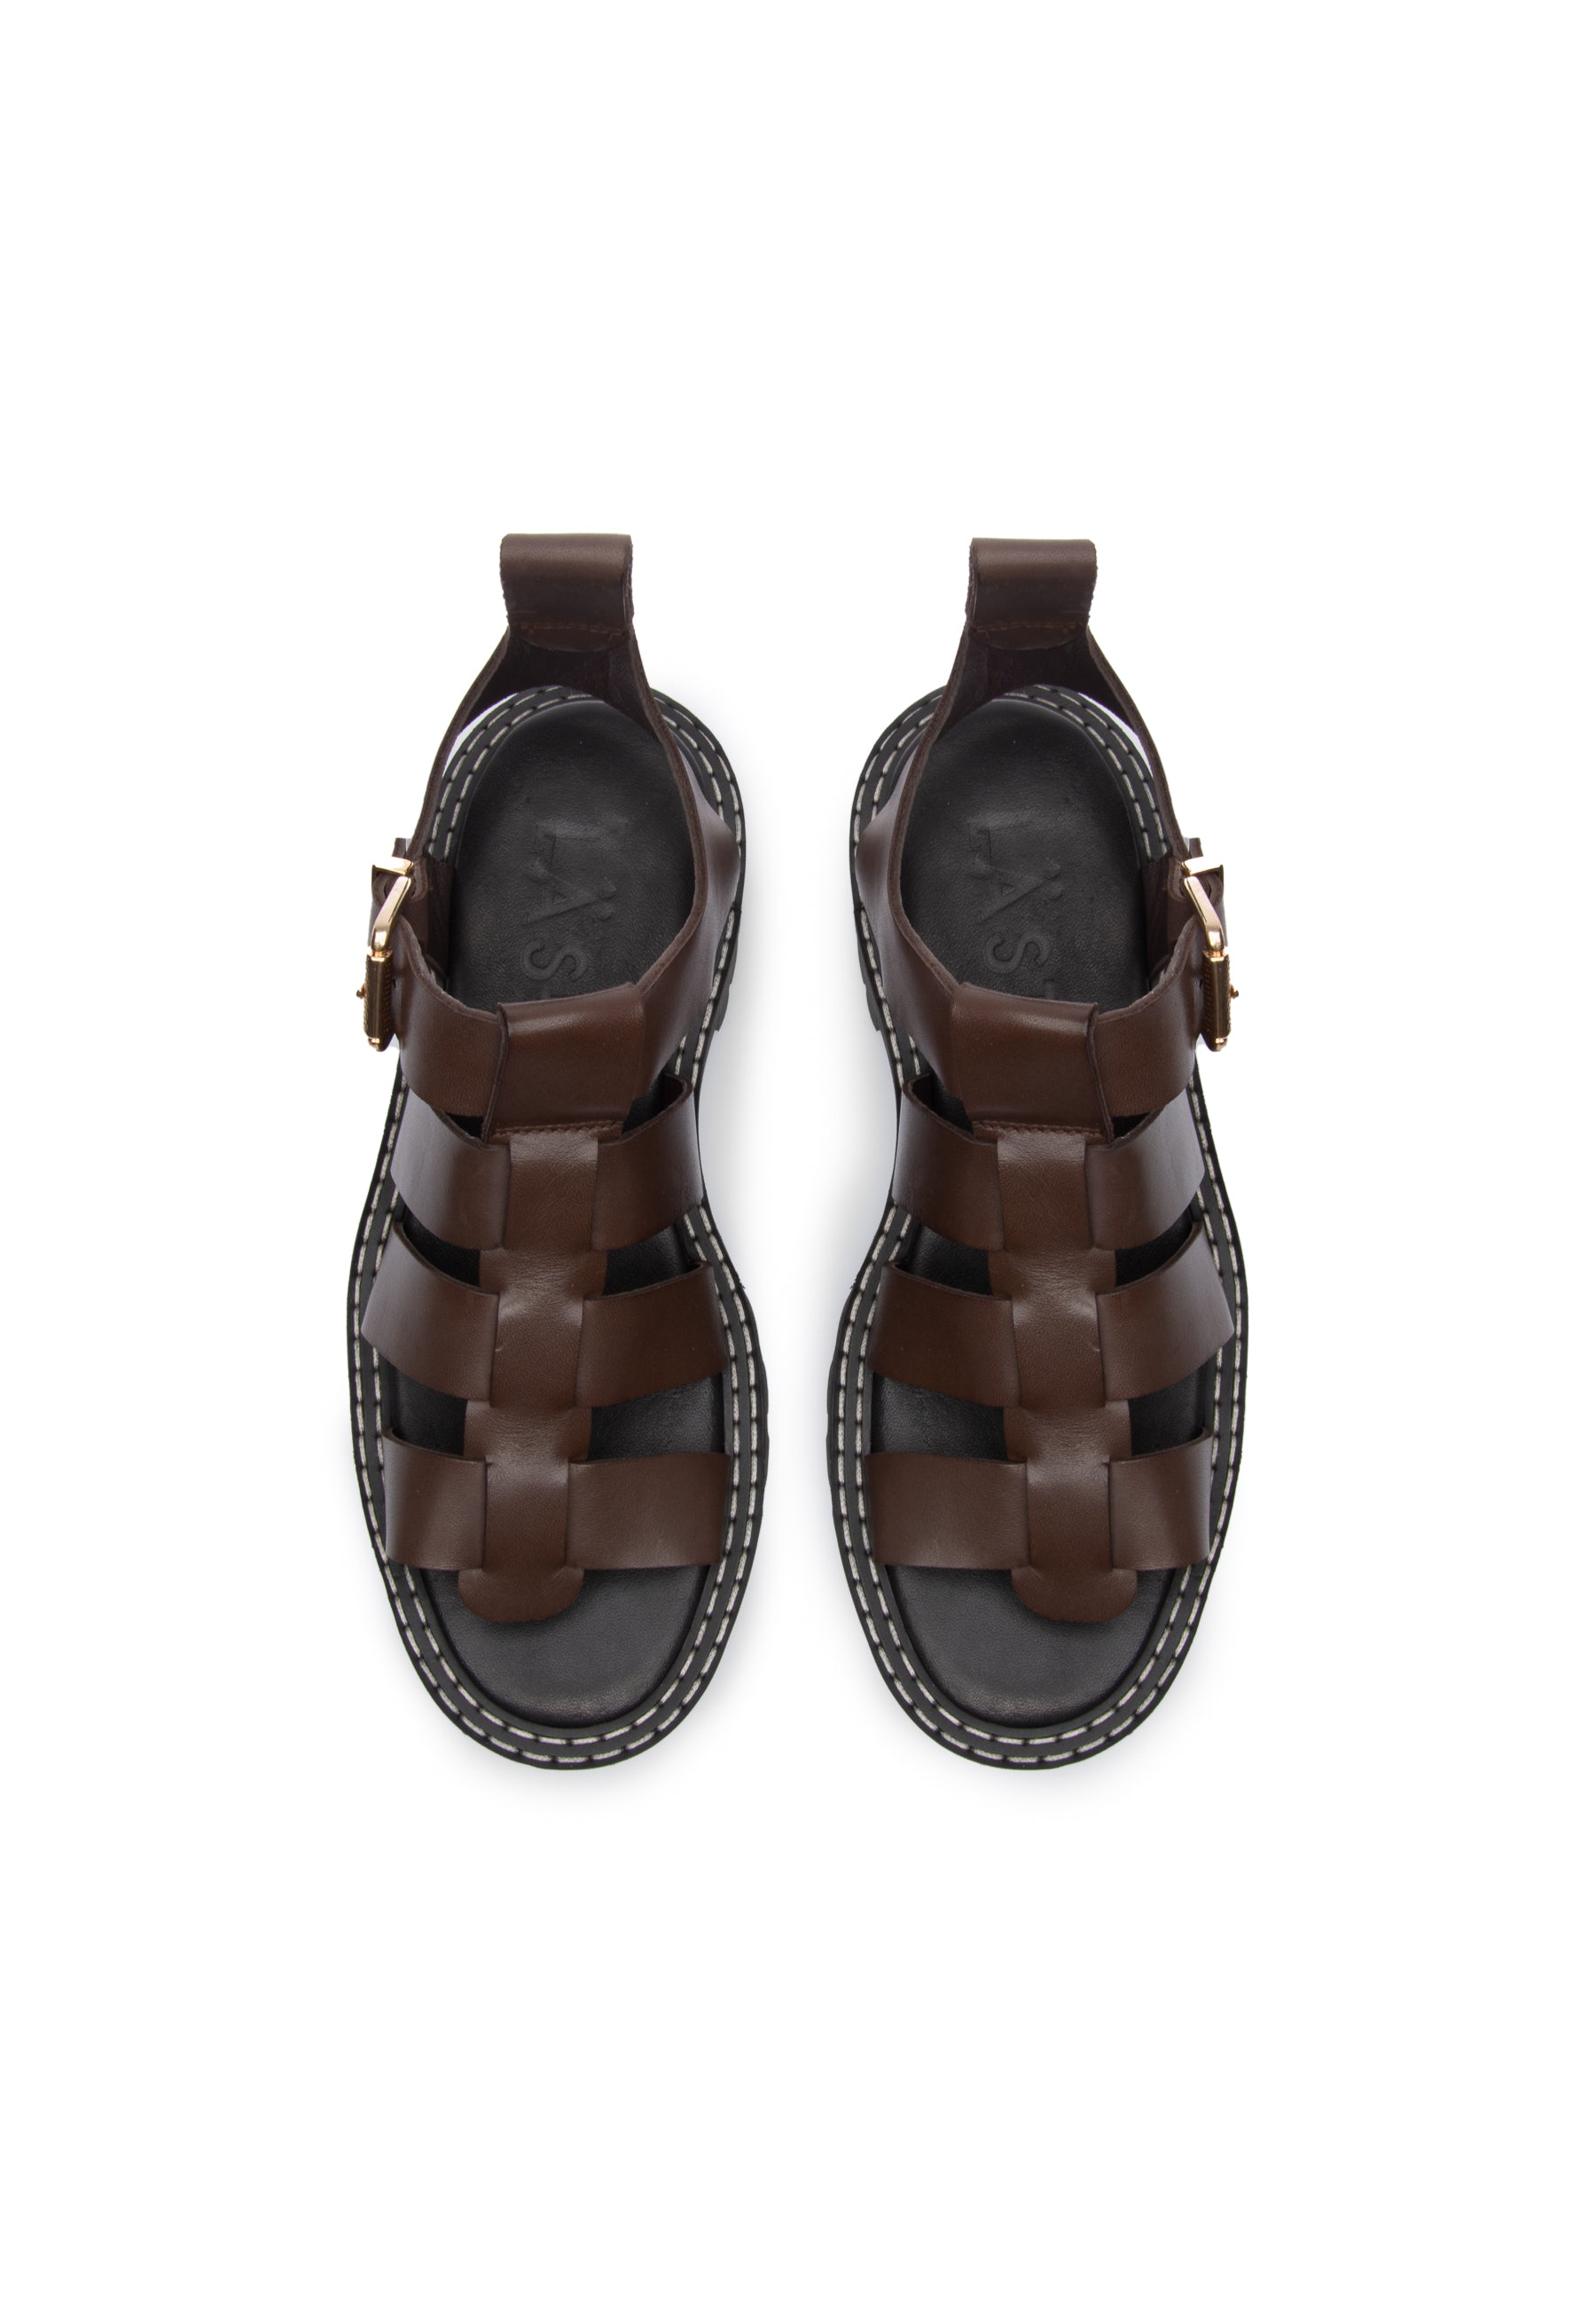 Daphny Brown Leather Chunky Sandals LAST1519 - 4